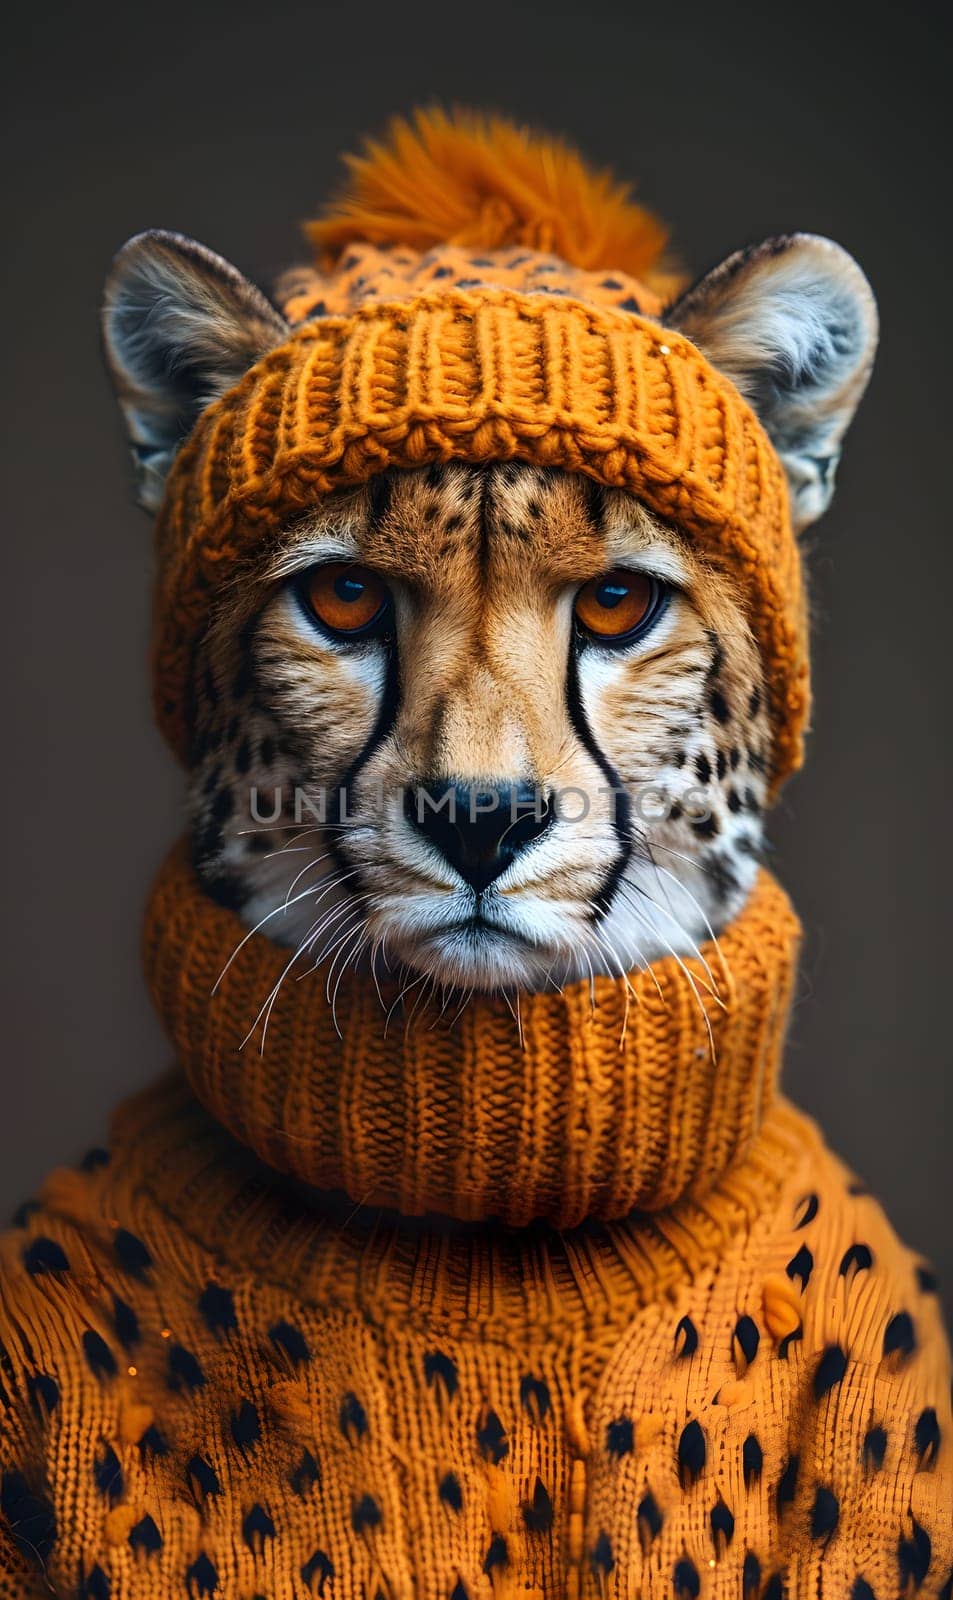 Felidae sporting a hat and sweater among big cats in artistic depiction by Nadtochiy